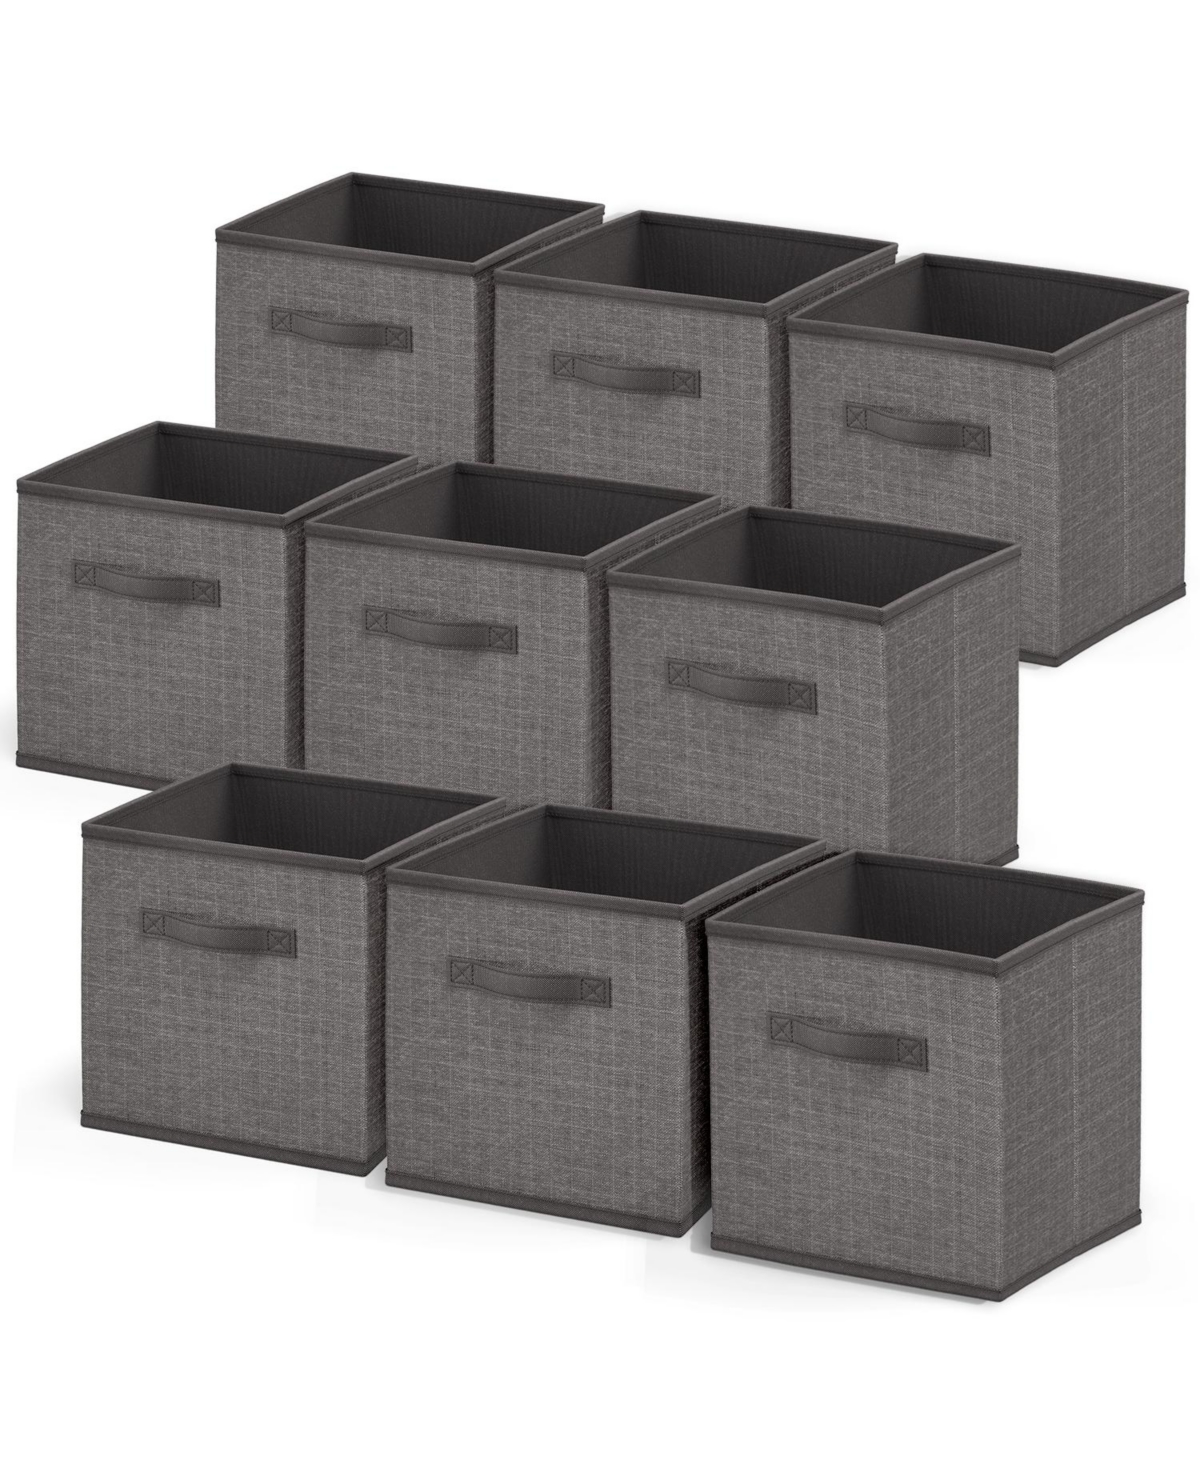 Foldable Fabric Cube Storage Bins with Handles - 9 Pack - Grey